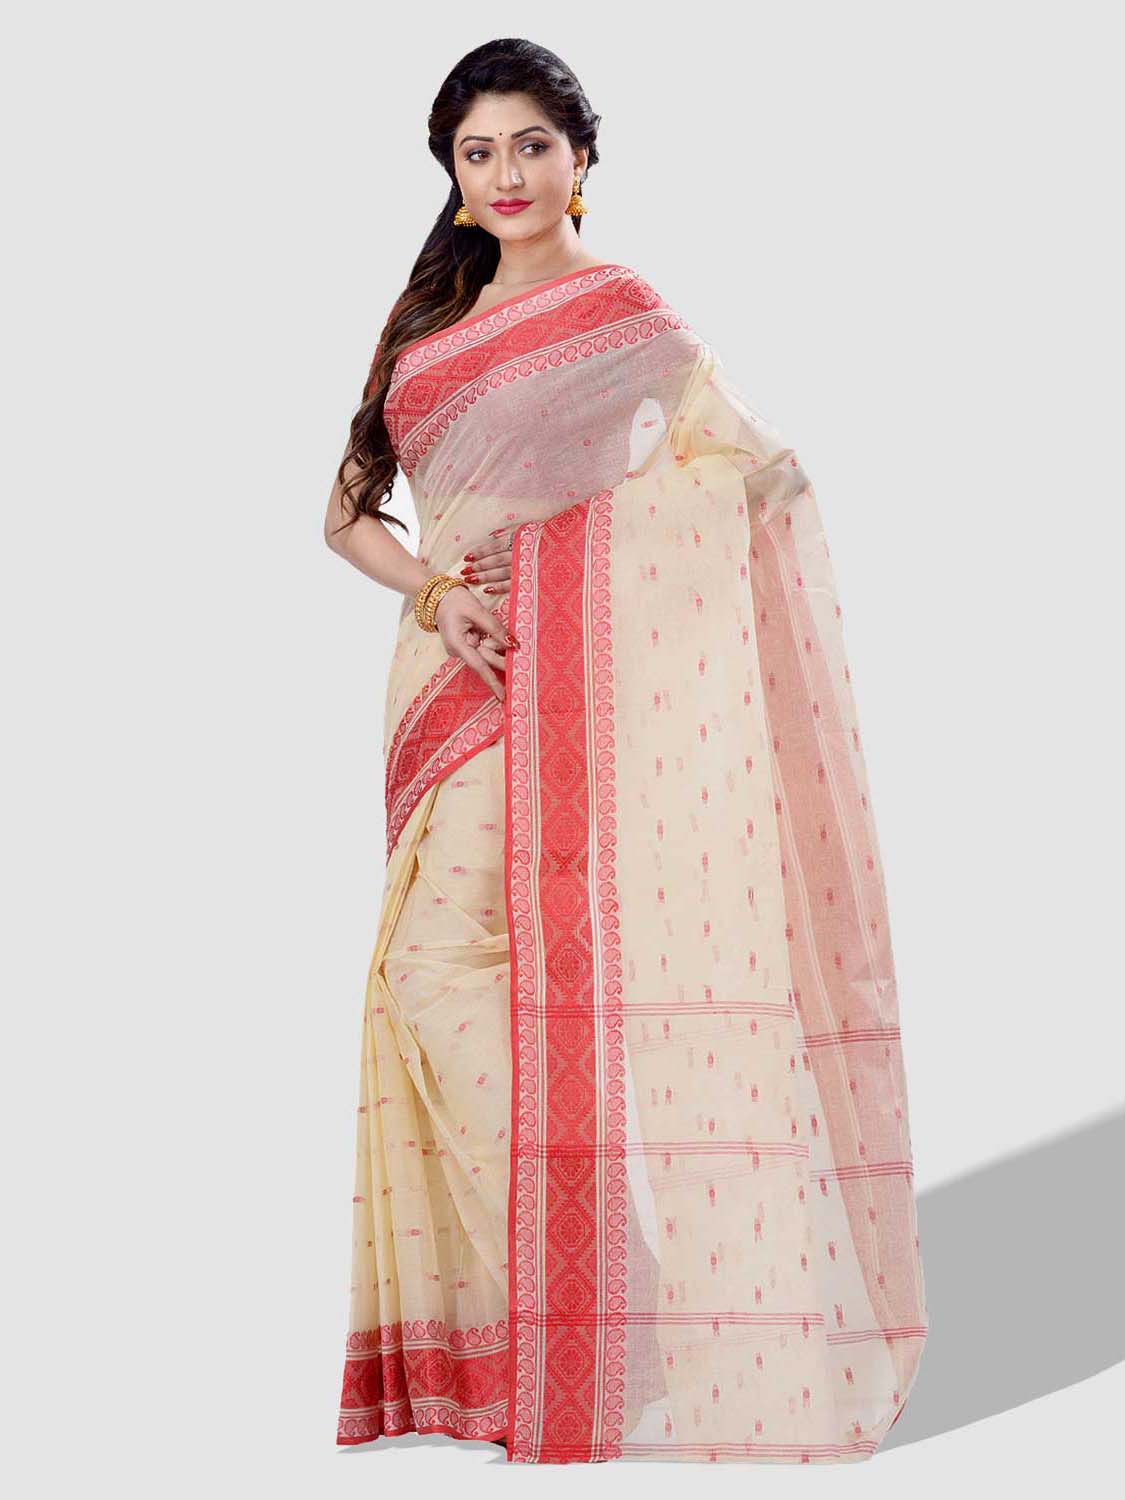 Famous Bengali Sarees From West Bengal You Must Wear at Upcoming Weddings